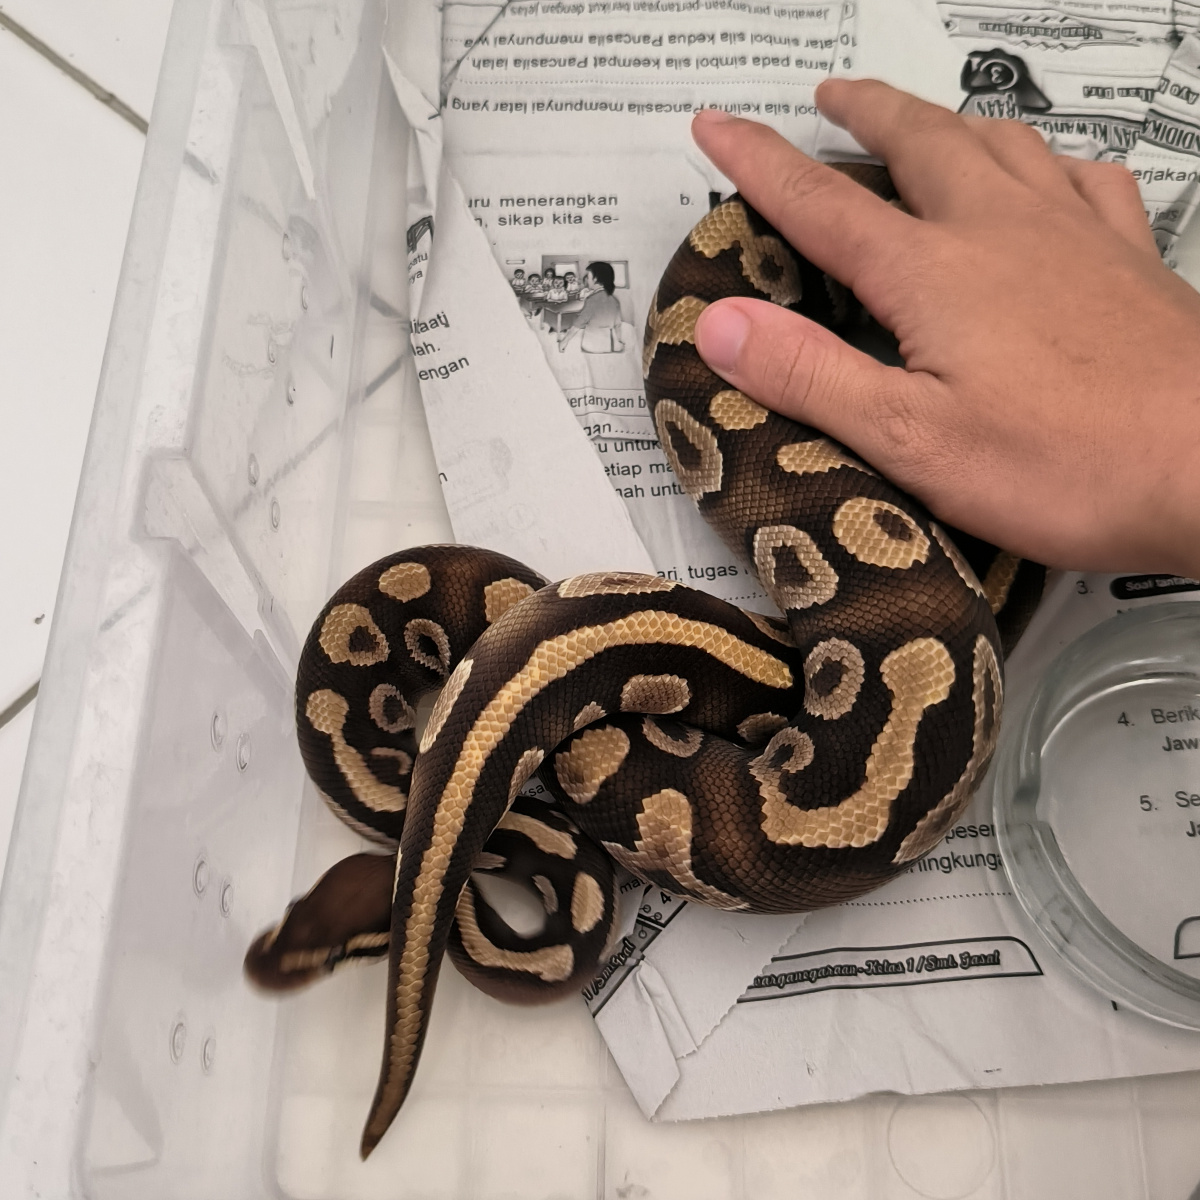 Mojave yellowbelly 1.0